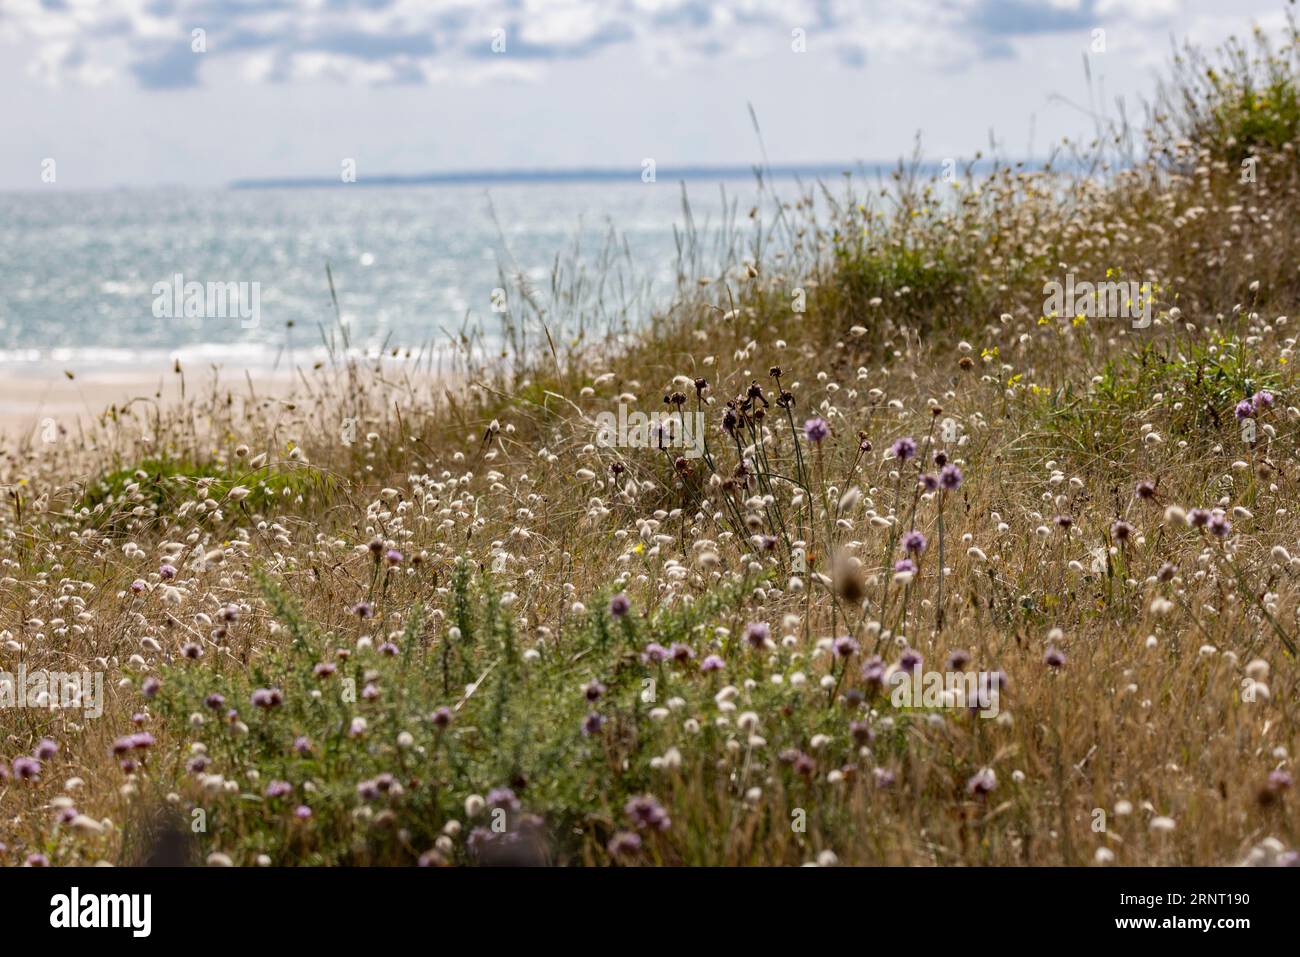 Summery, idyllic dune landscape, overgrown with hare's-tail grass or hares tail grass (Lagurus ovatus) and various other grasses and flowers in front Stock Photo